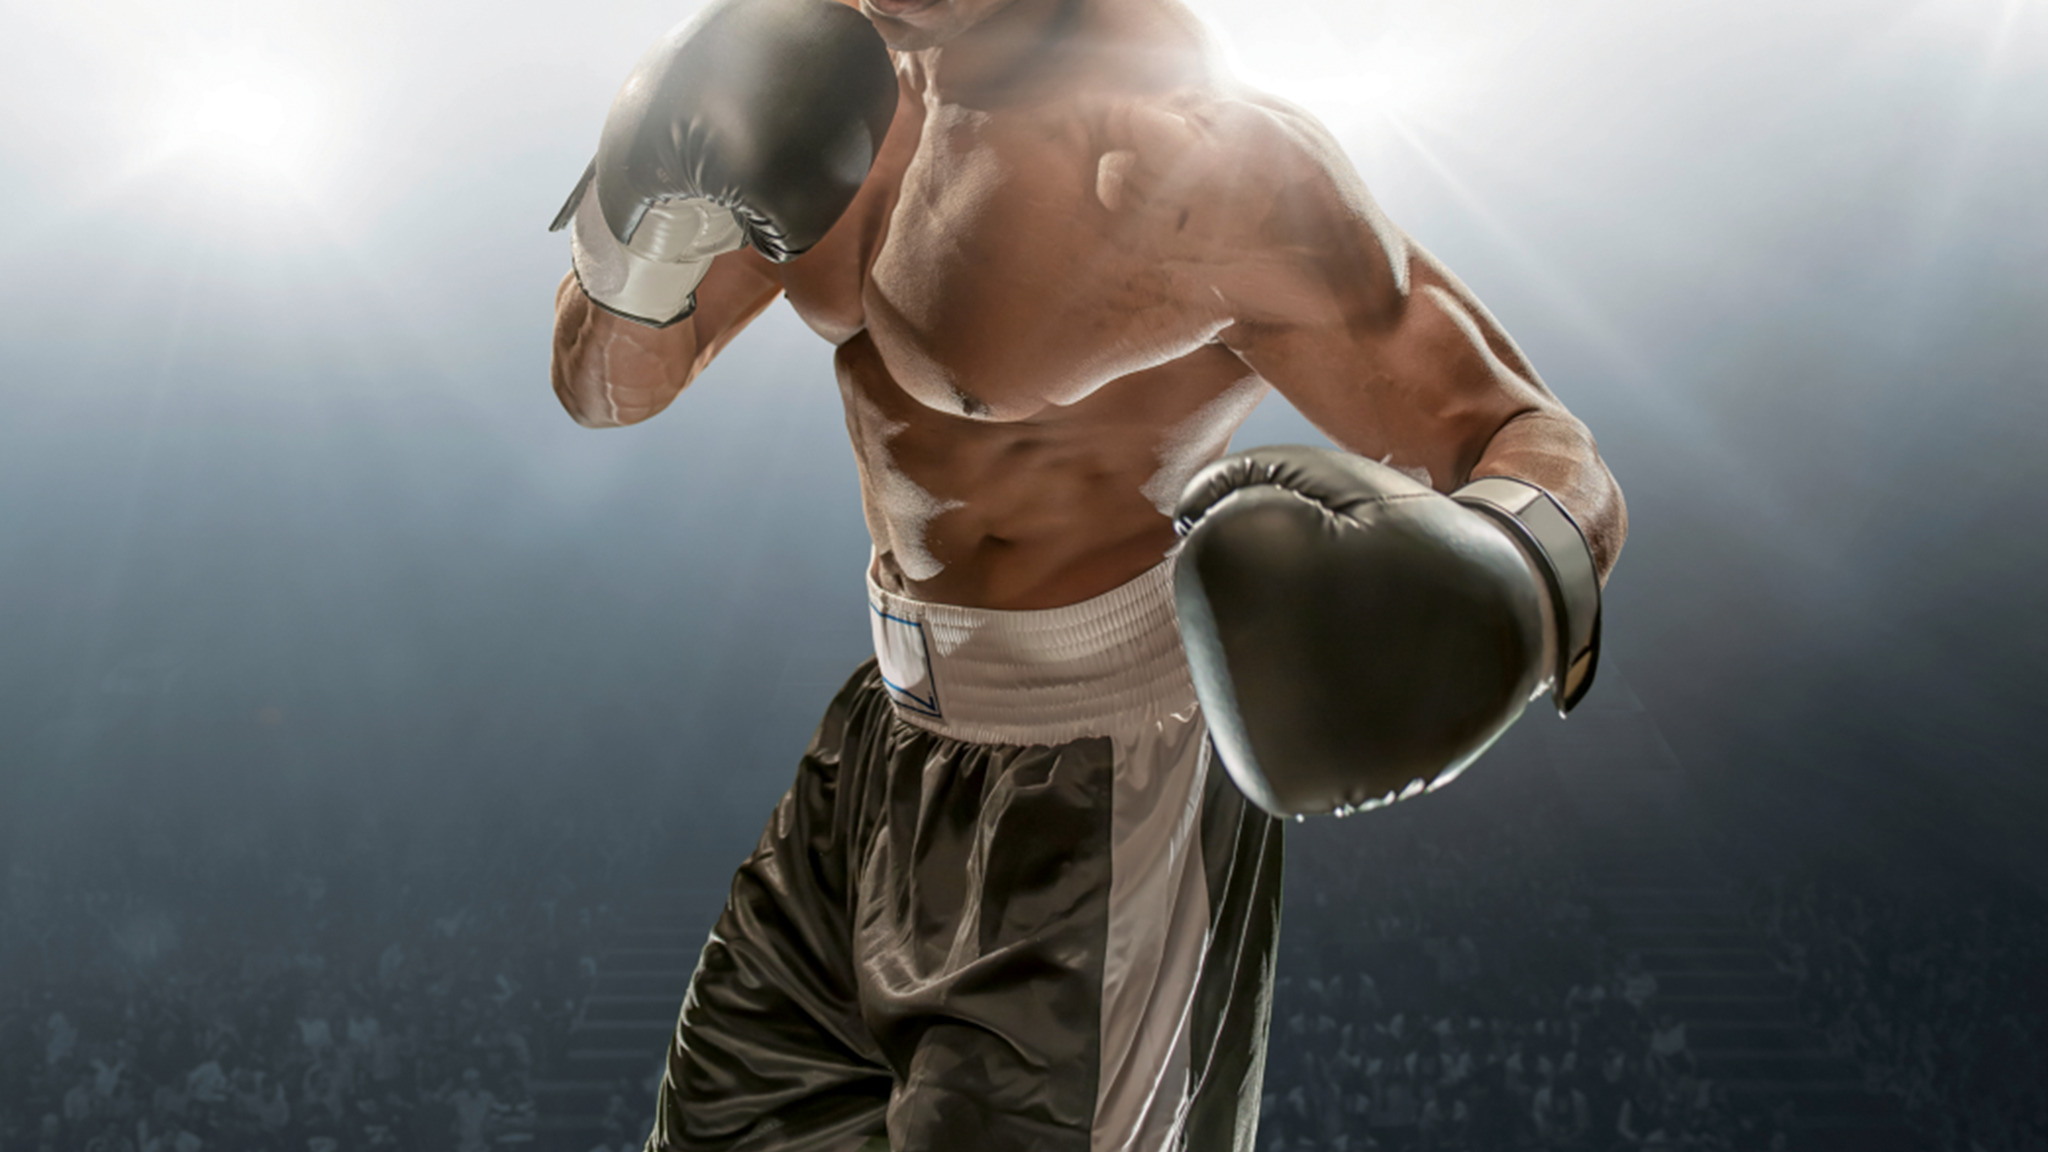 Professional Boxing Tickets Single Game Tickets & Schedule